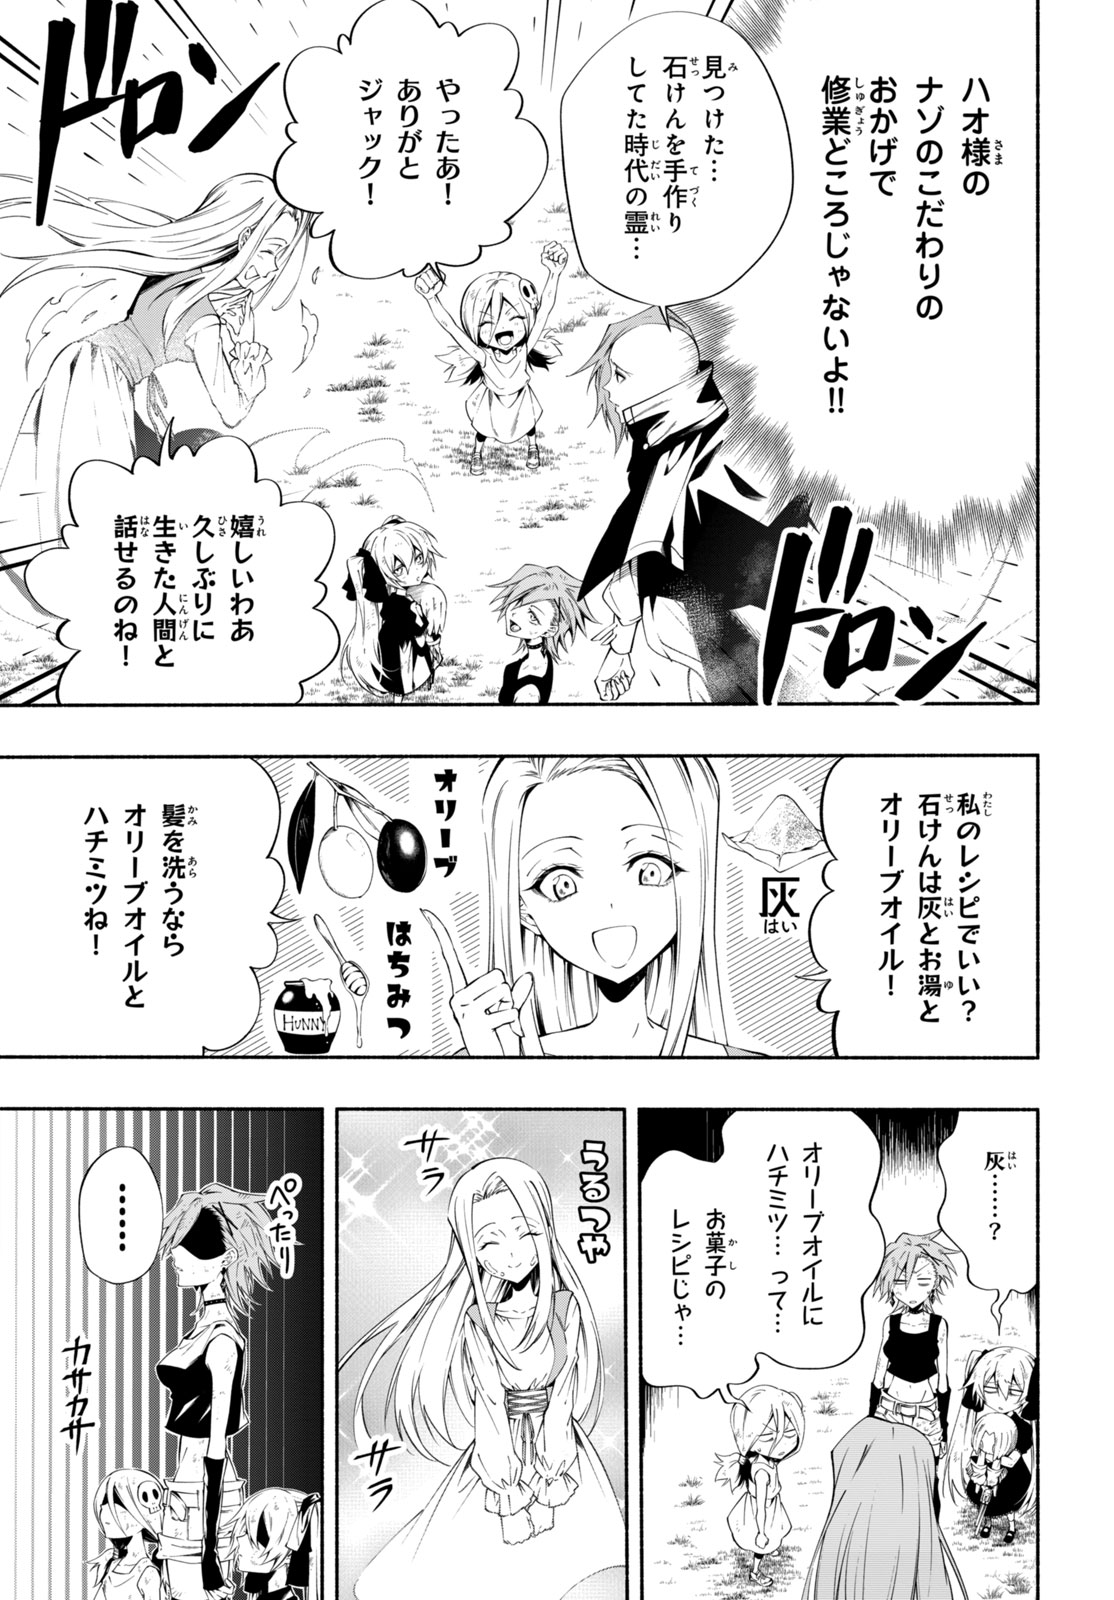 Shaman King: and a garden 第16.1話 - Page 5